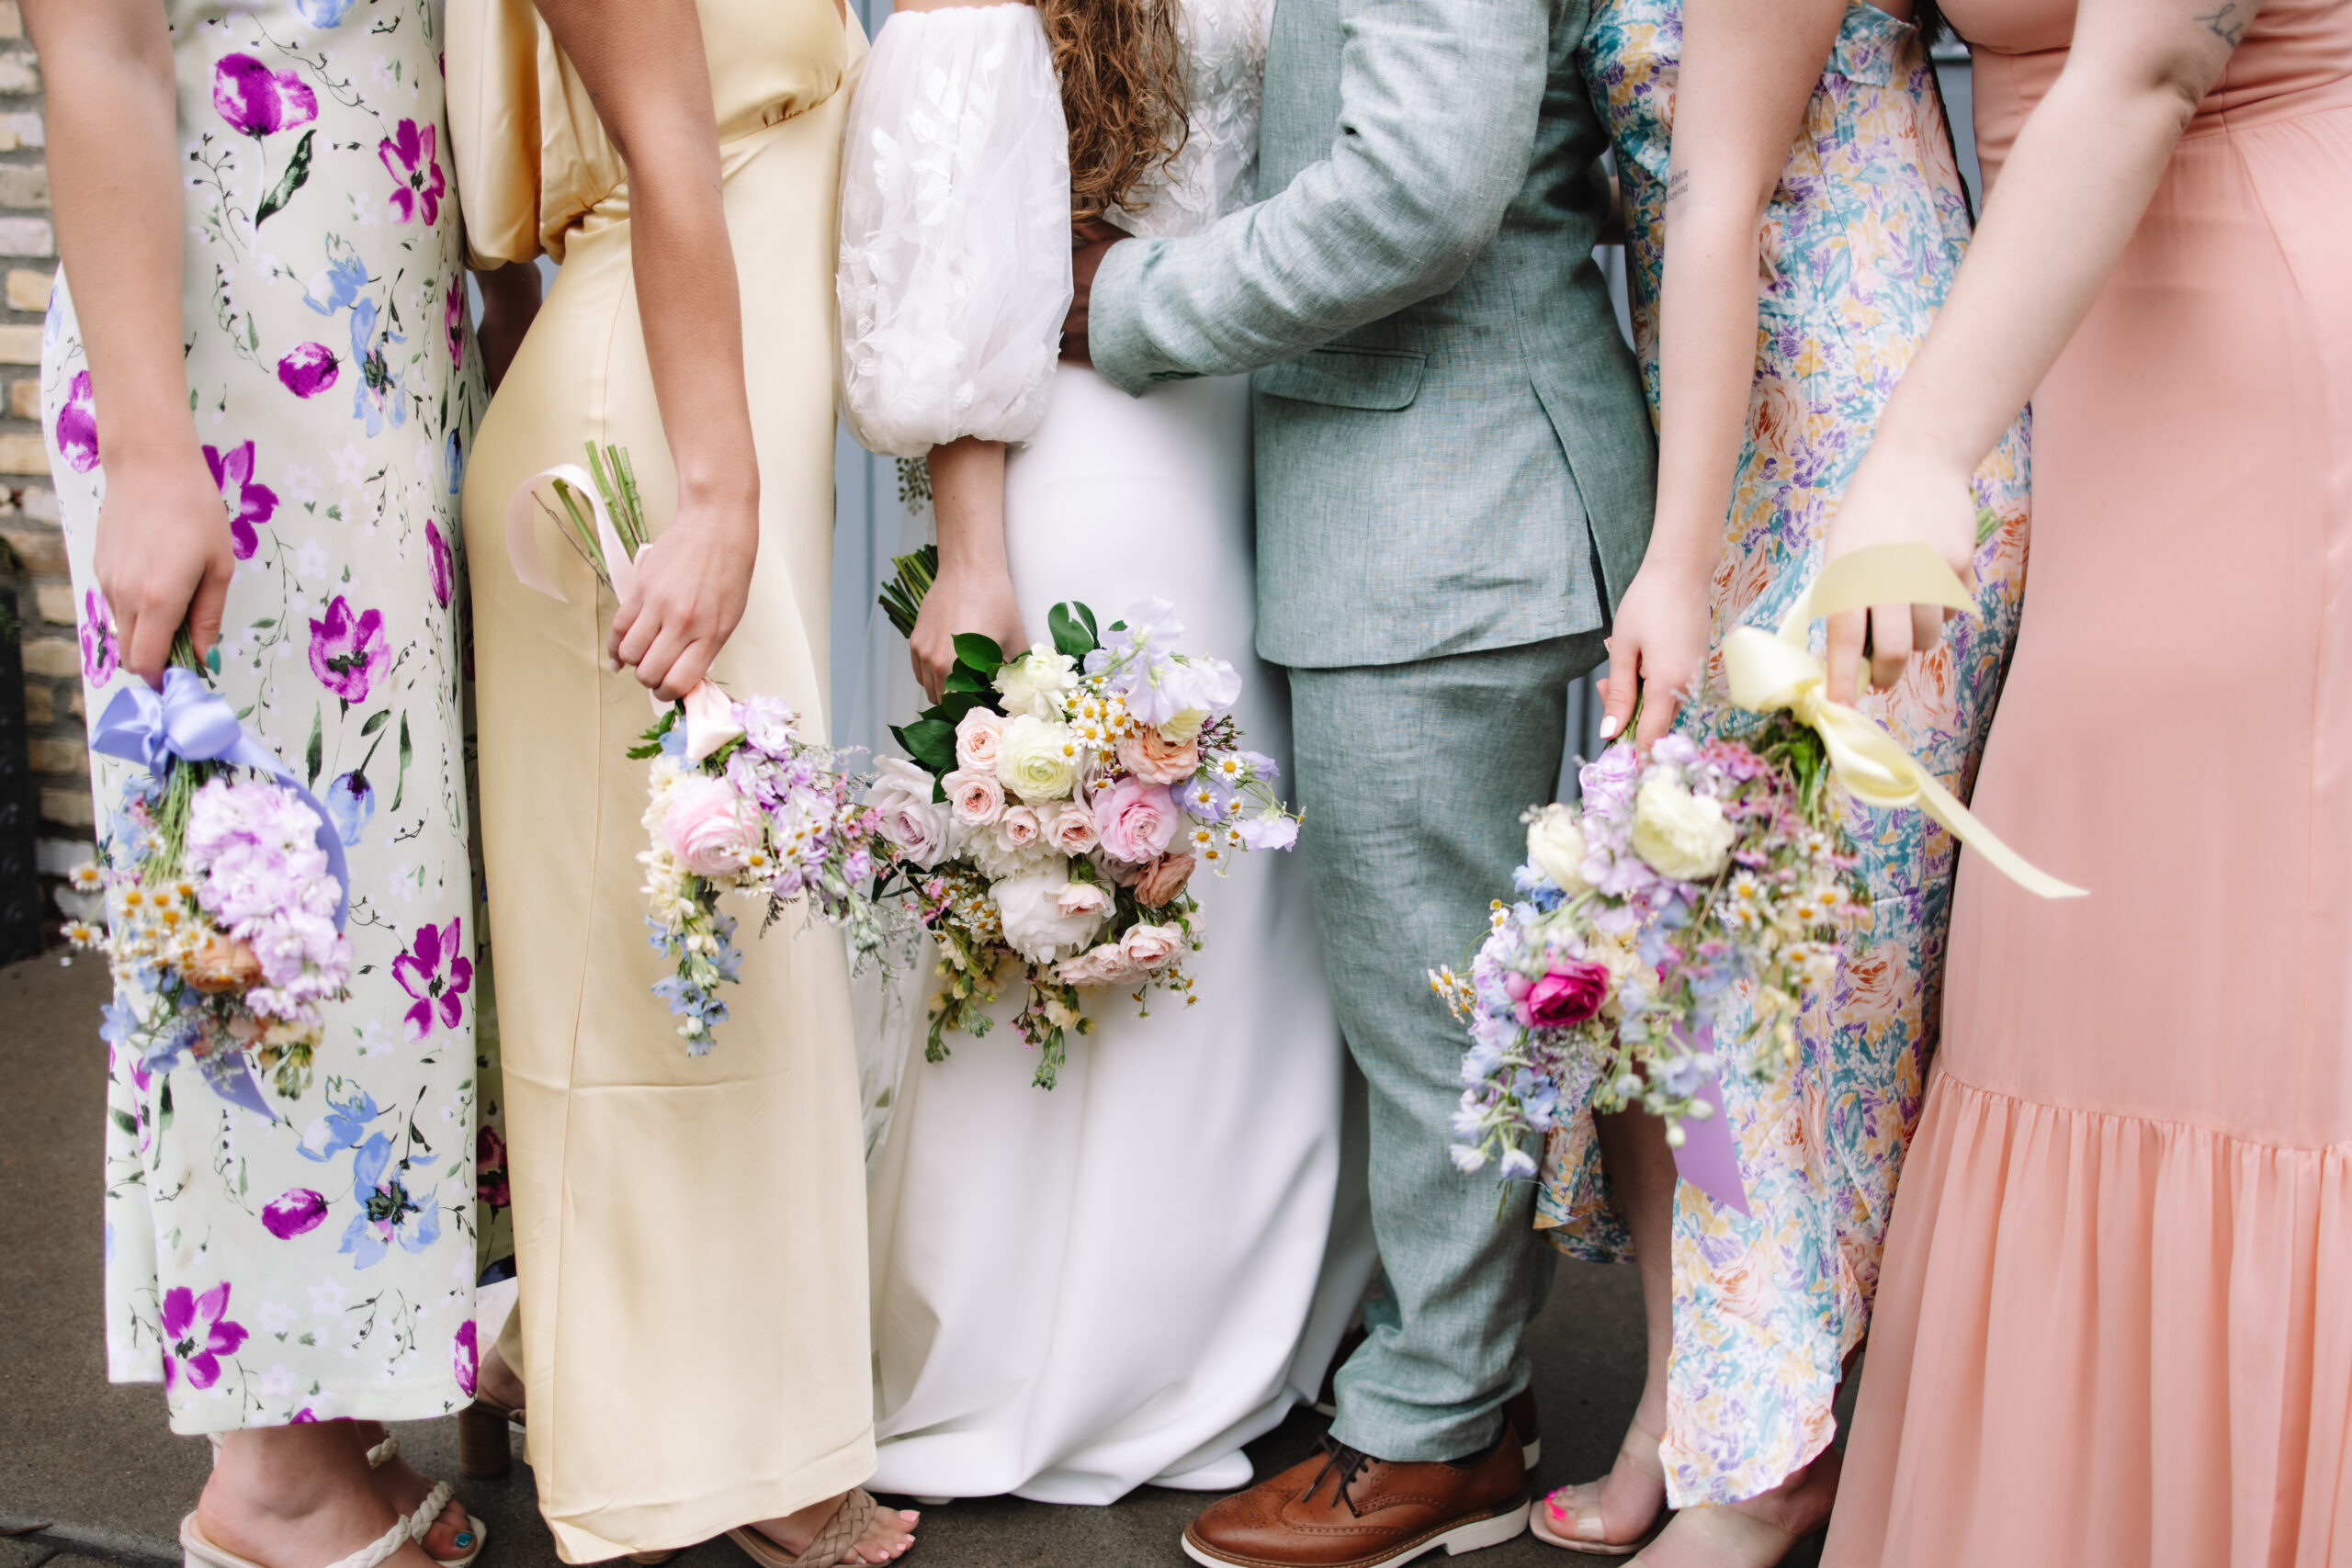 Bridesmaids standing next to the bride in their colorful spring mismatched bridesmaids dresses, holding their colorful spring bouquets next to their sides